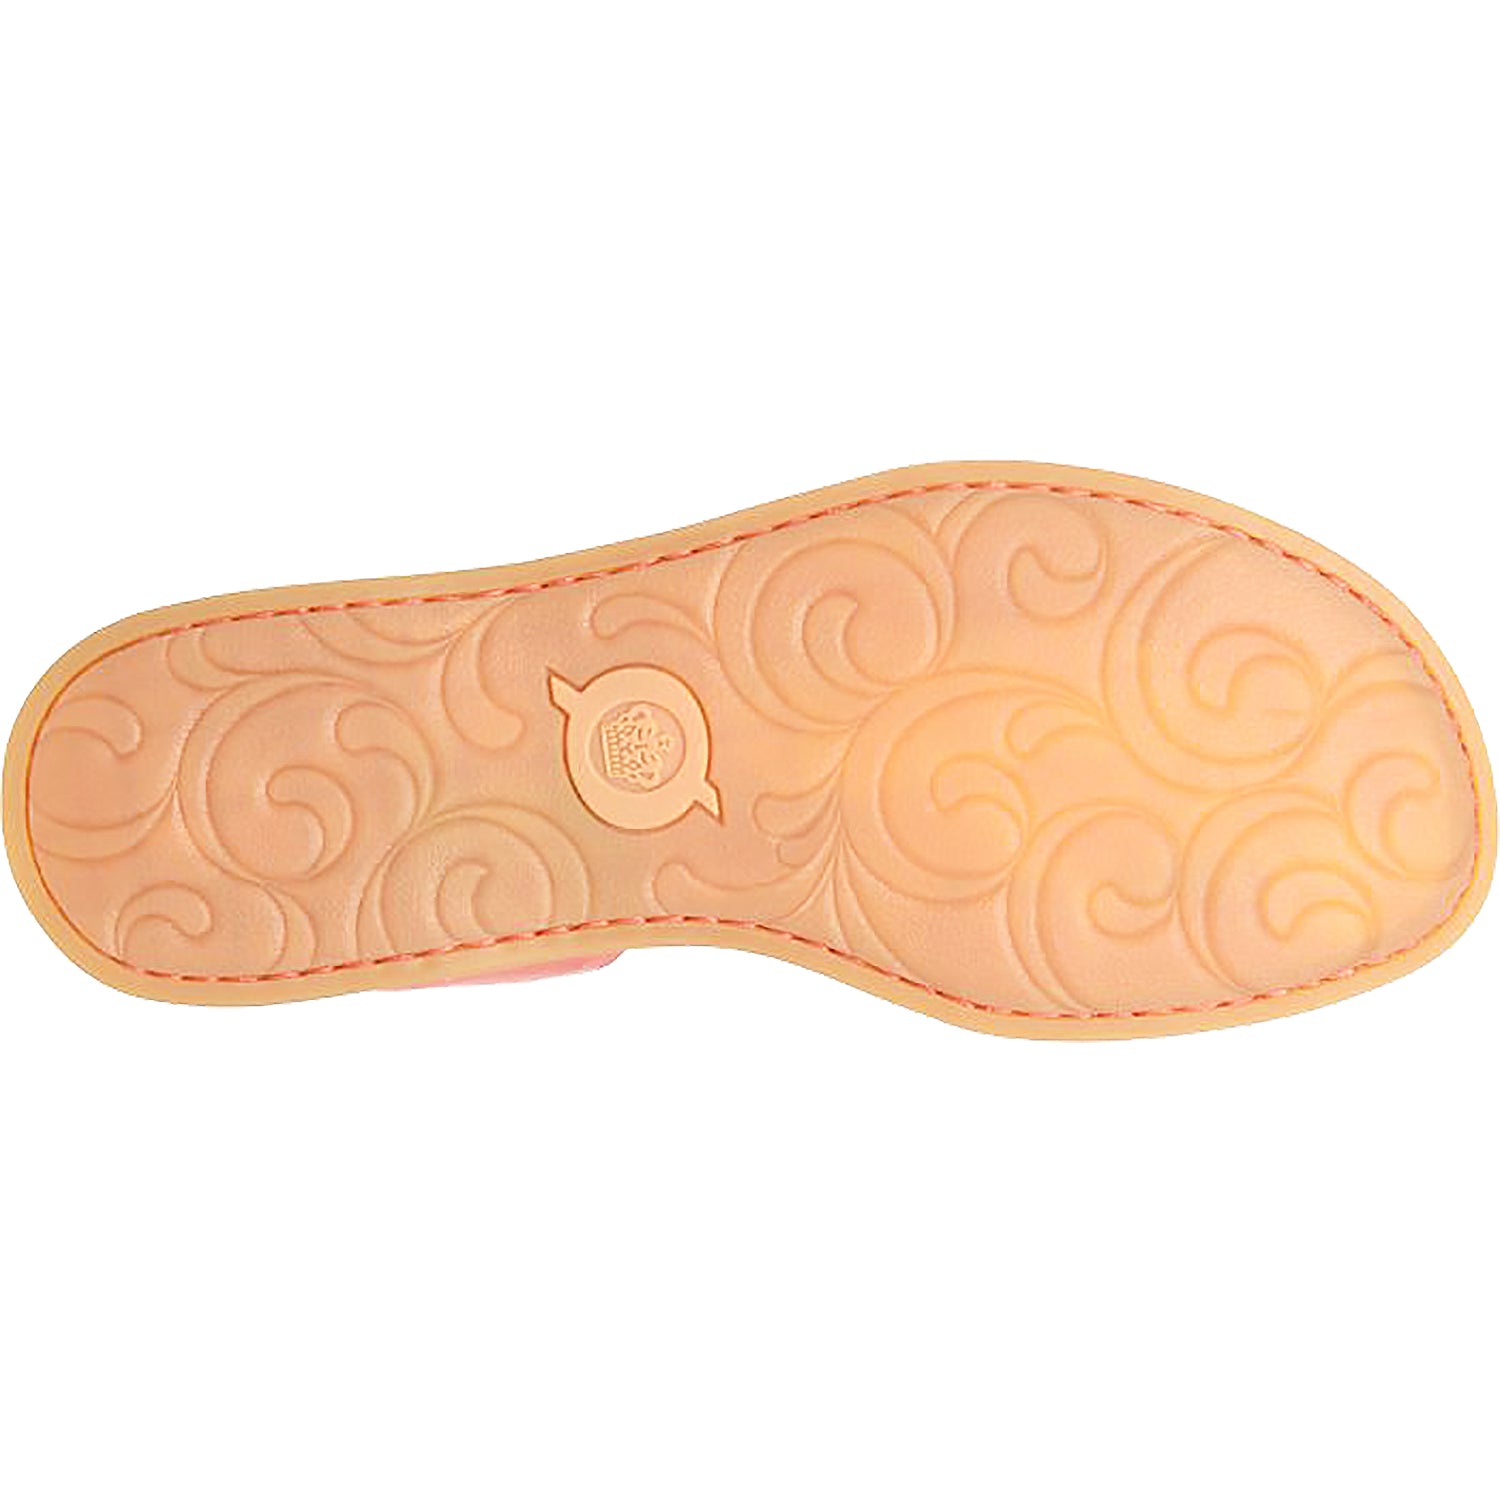 Discontinued Born Sandals Hotsell, SAVE 49% - online-pmo.com